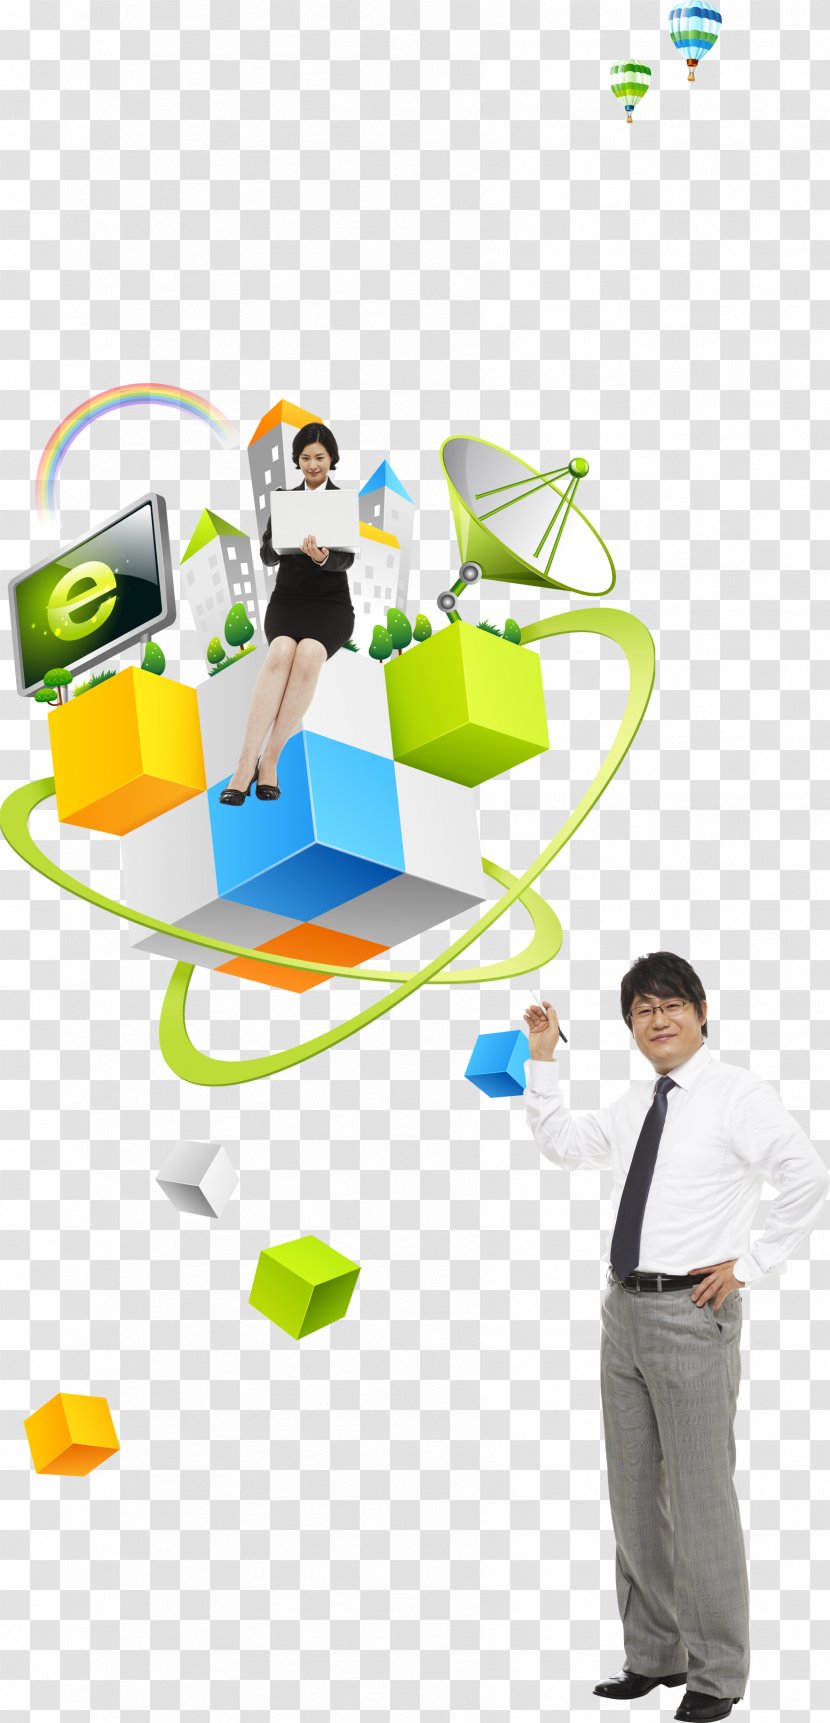 Download Commerce - Organization - Business People Fish In Network Times Transparent PNG